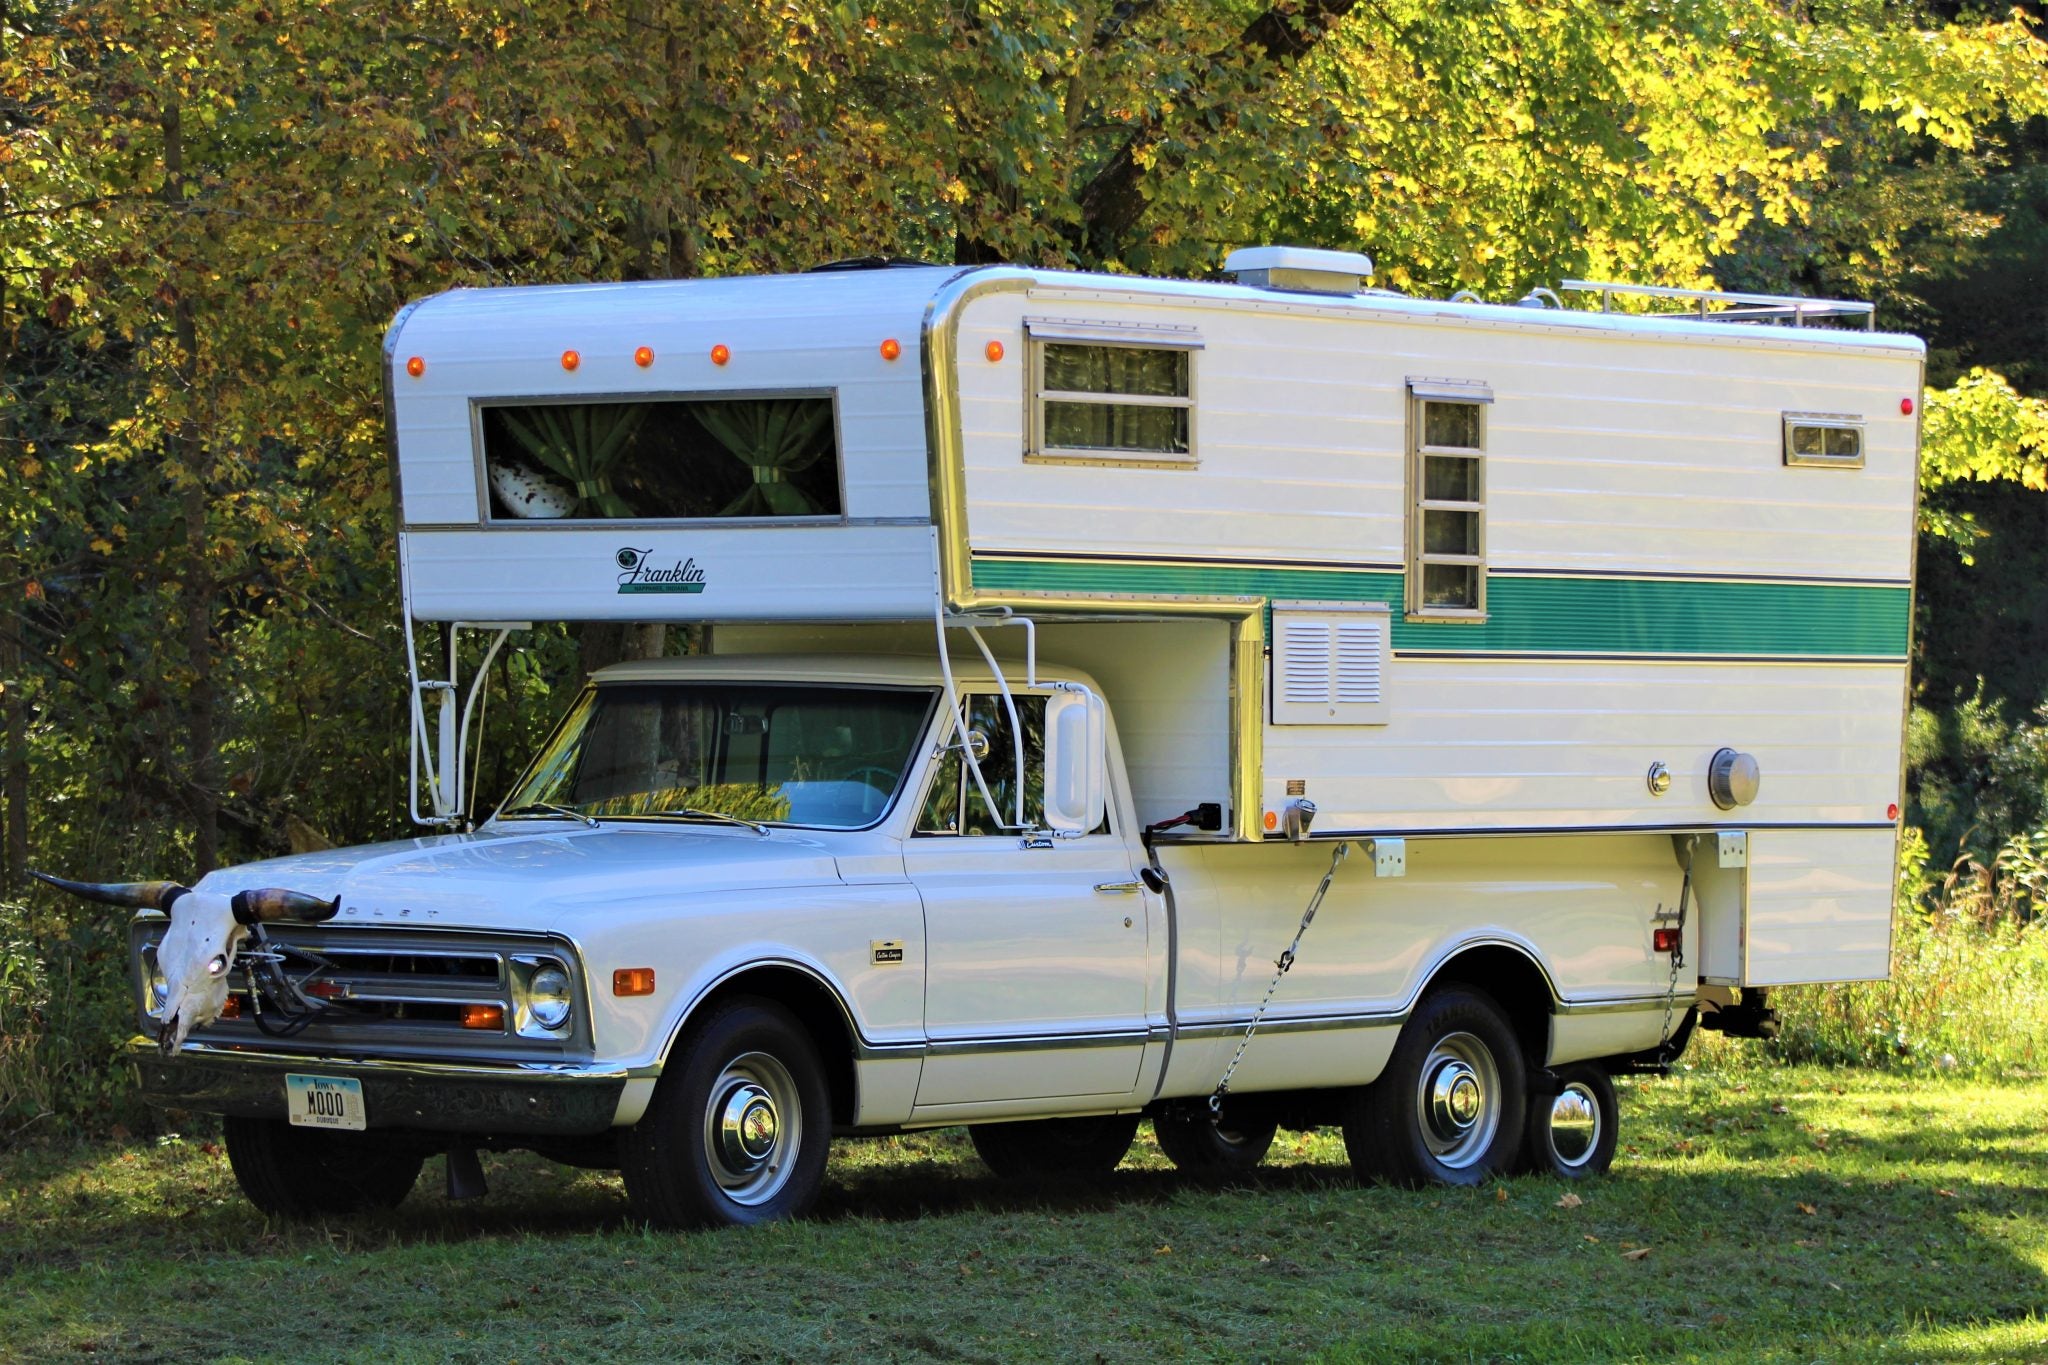 This Classy Camper Comes With Horns, A Playboy Magazine And… Some Flamethrowers